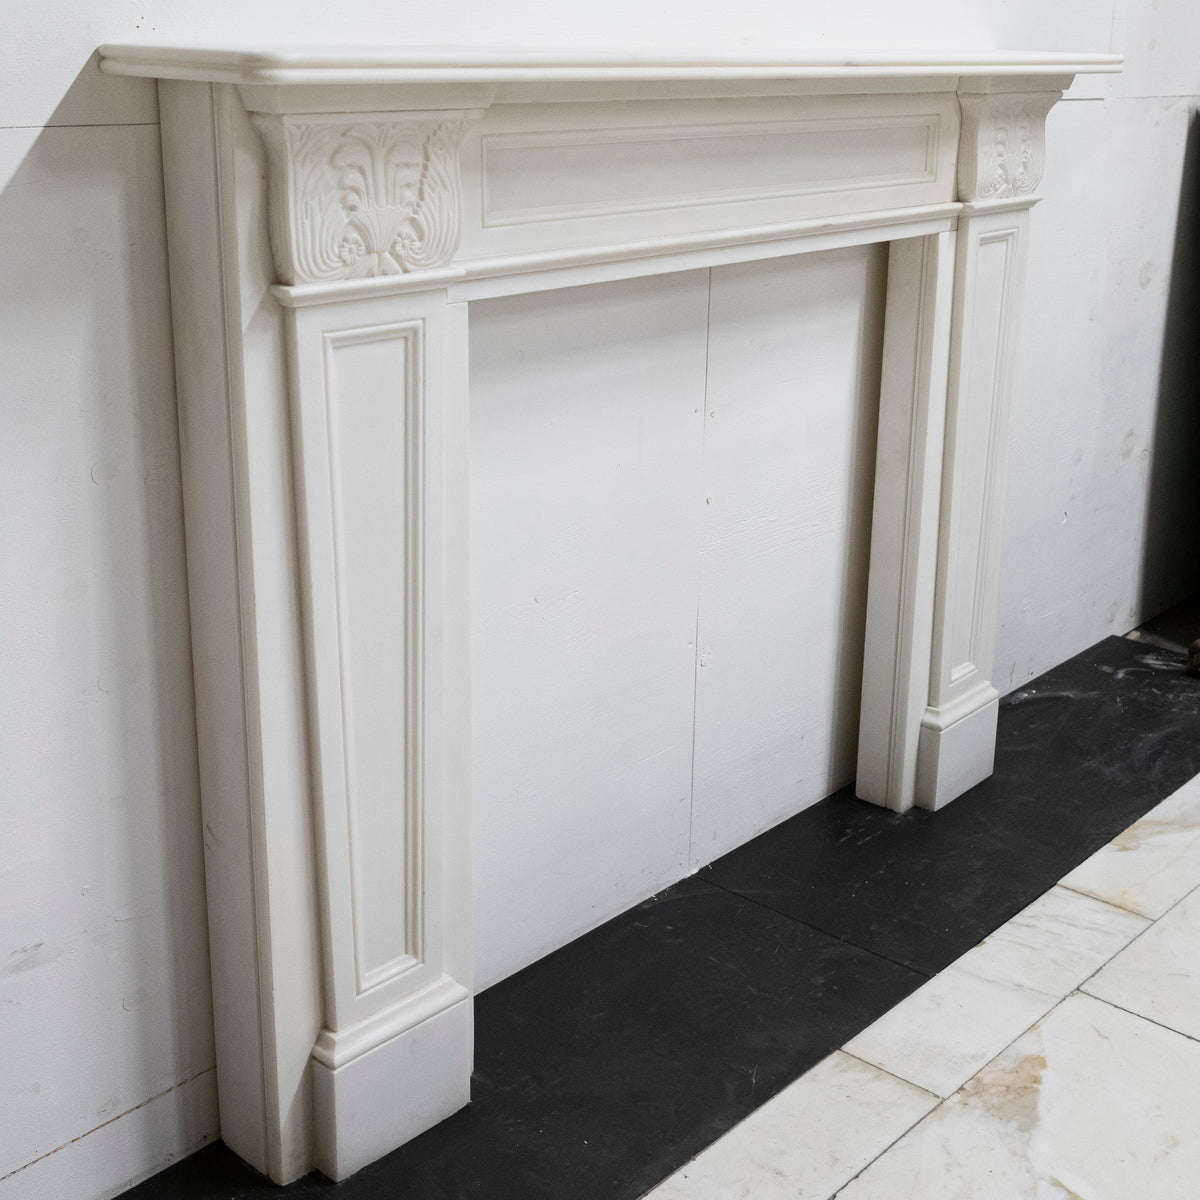 Regency Style Statuary Marble Surround with Acanthus | Pair Available | The Architectural Forum